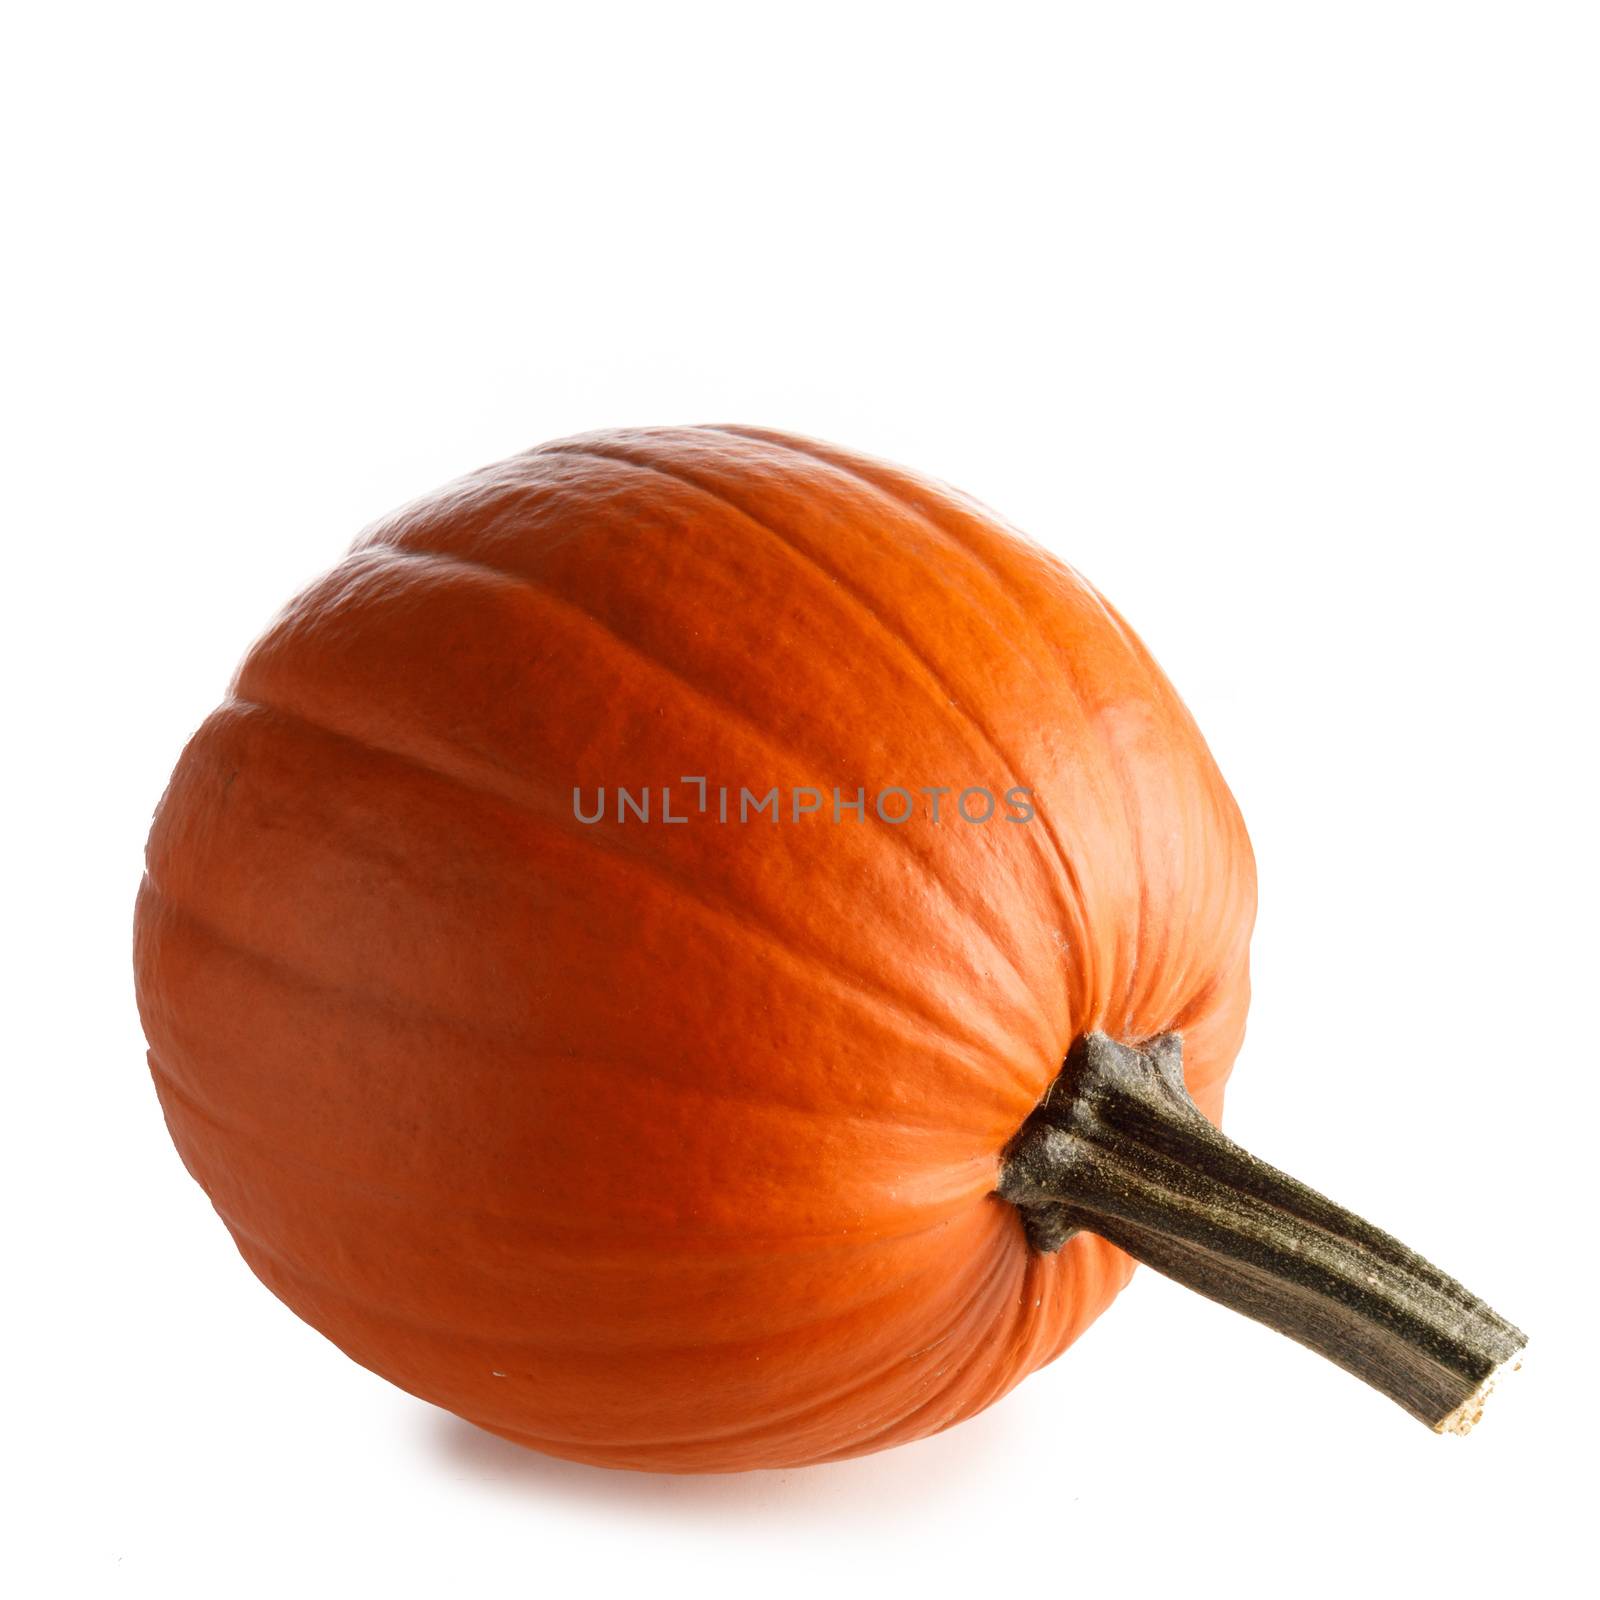 One perfect pumpkin isolated on white background